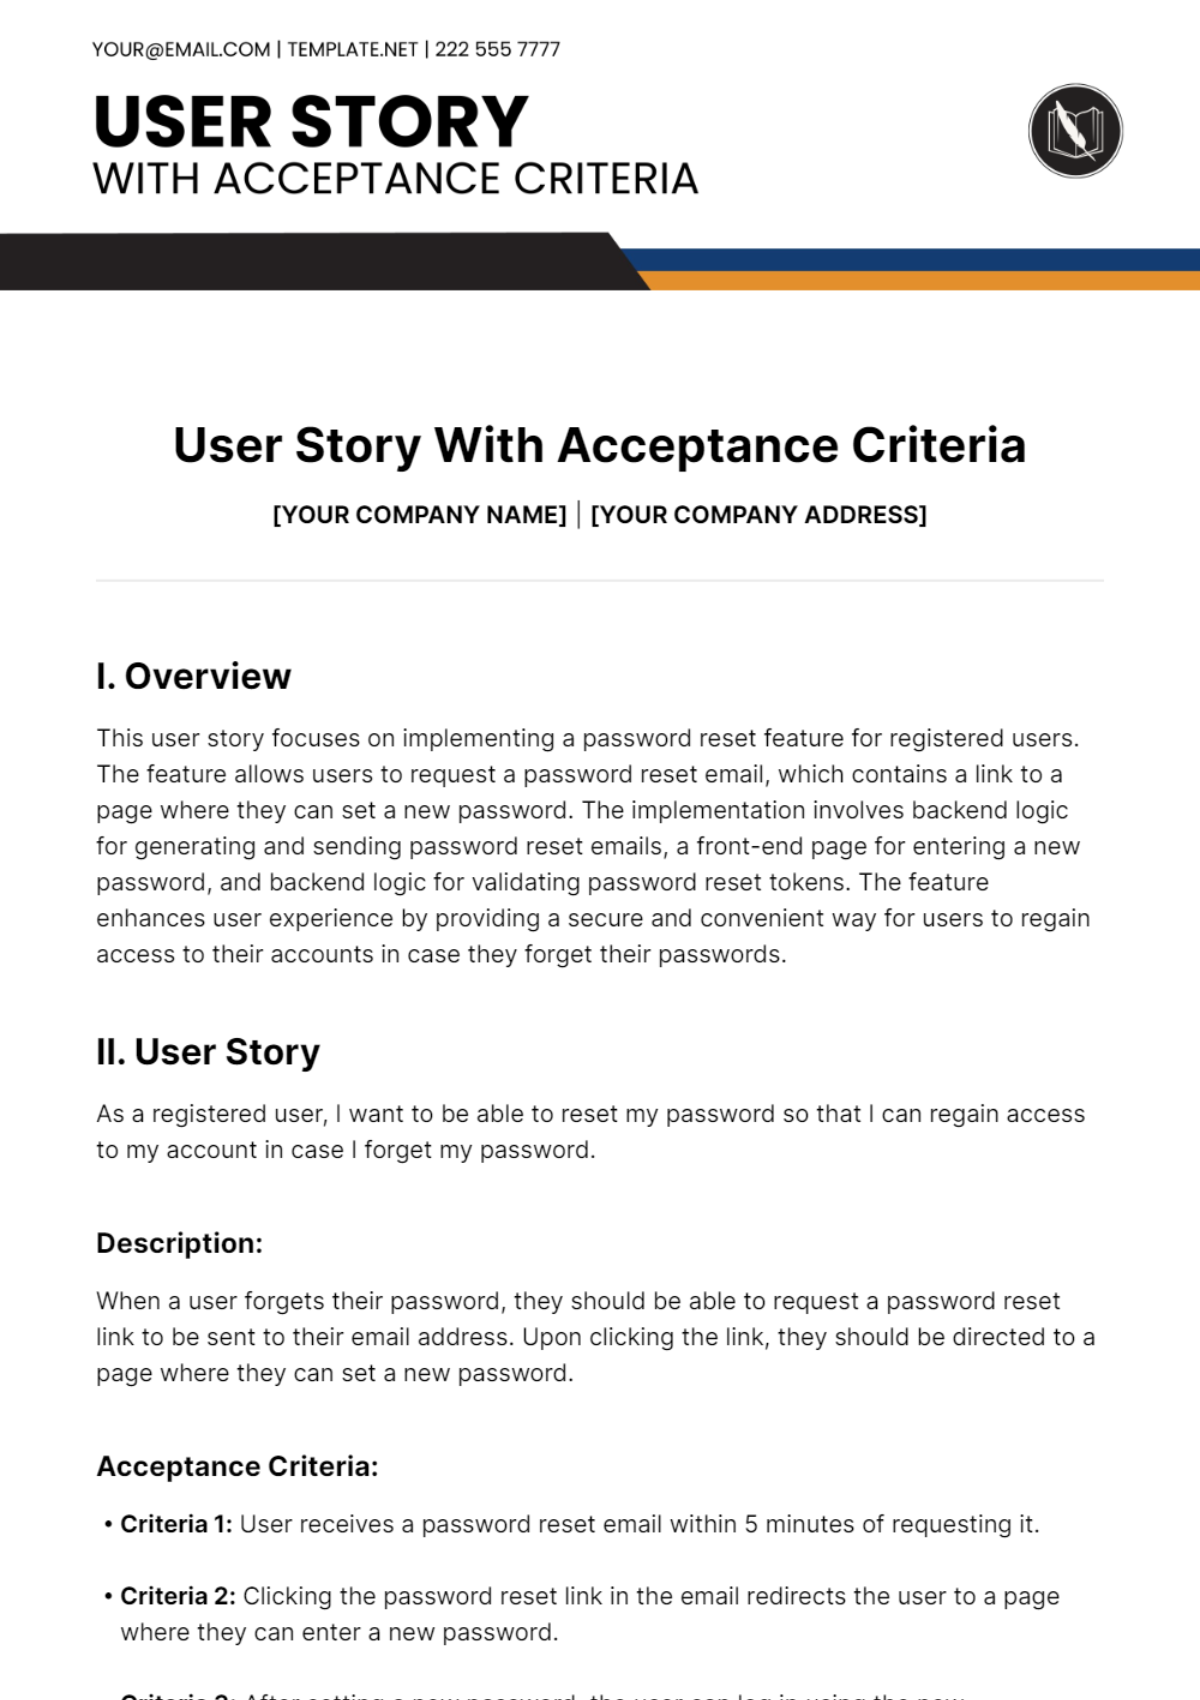 User Story With Acceptance Criteria Template